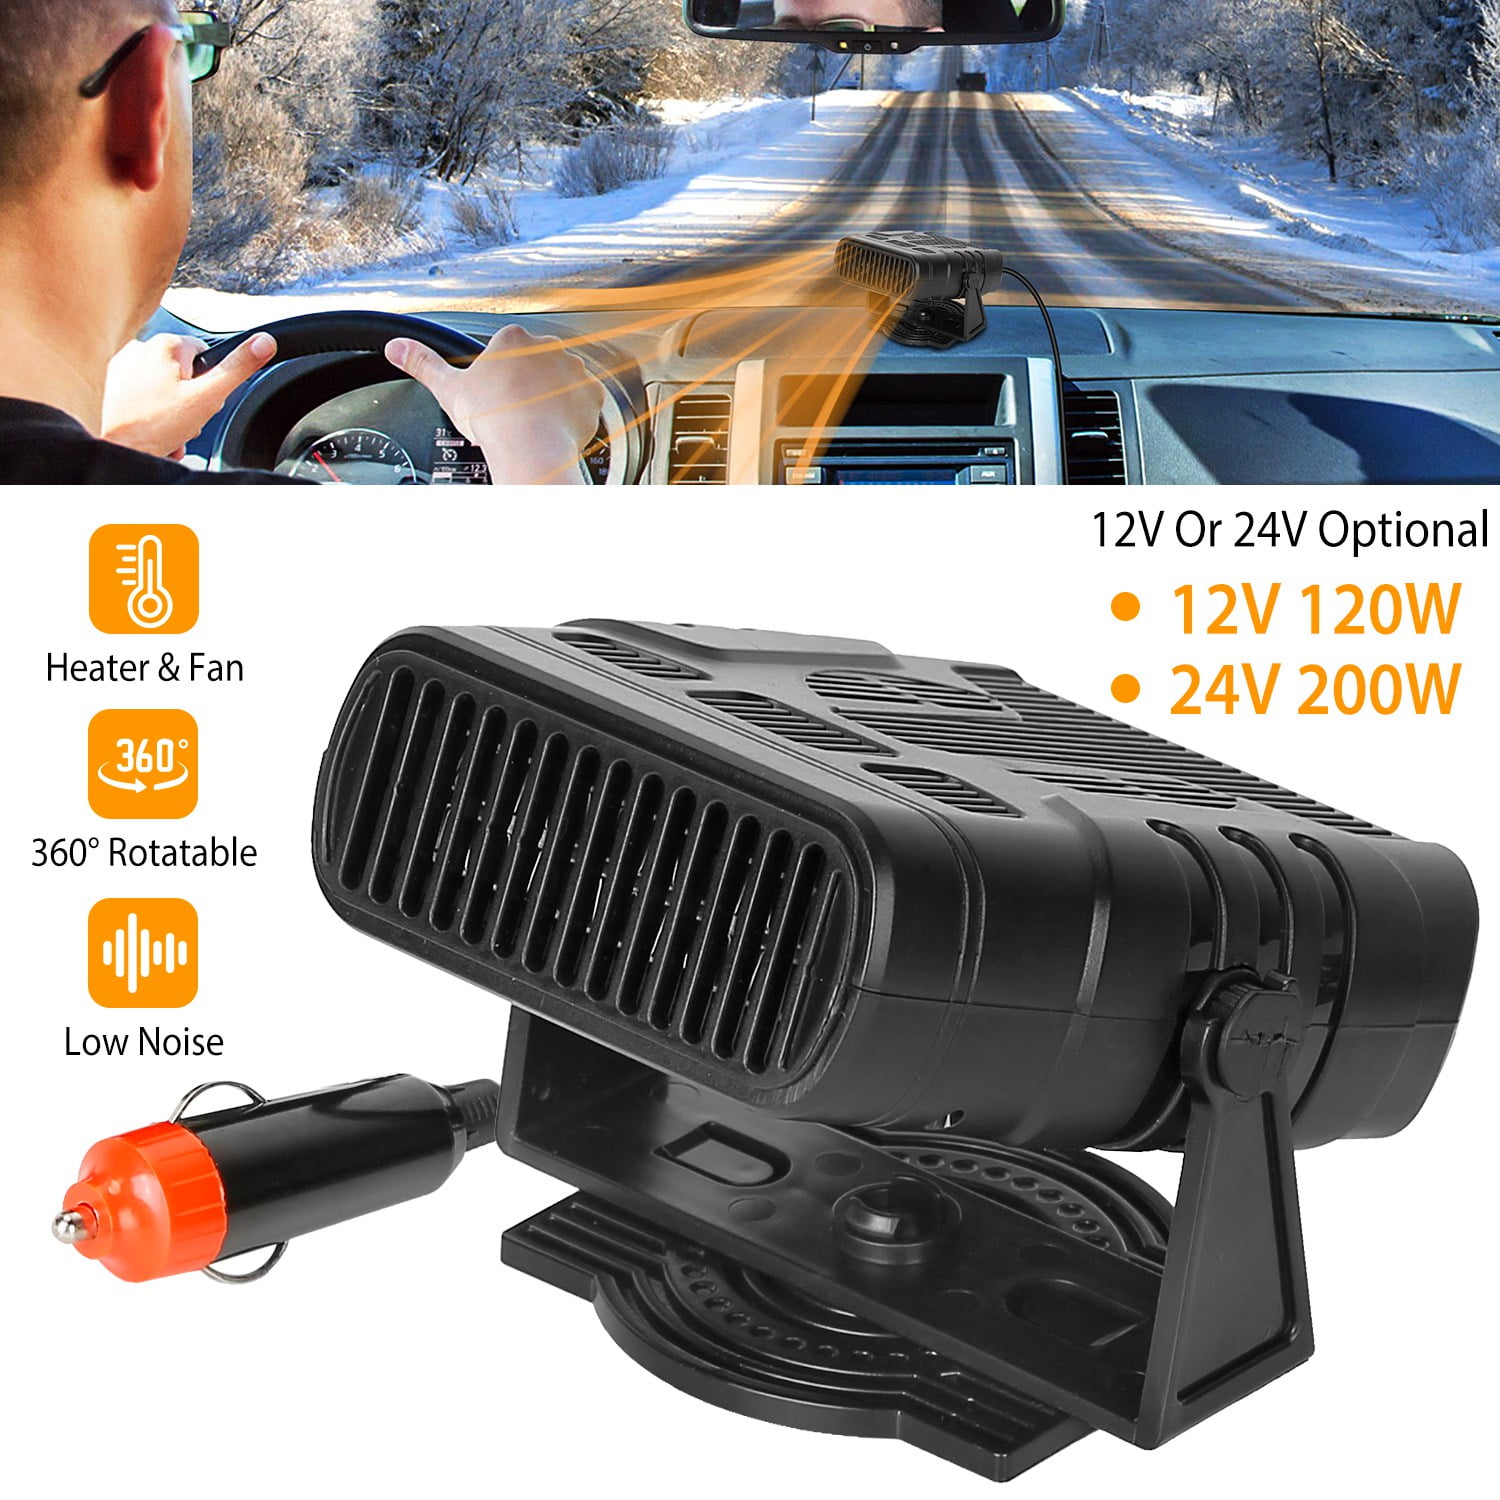 Portable Car Heater,360 Rotatable 12v 200w Car Heater Defroster 2 In 1  Heating & Cooling Fan Windshield Demisting Defroster Plug Into Cigarette  Lighte